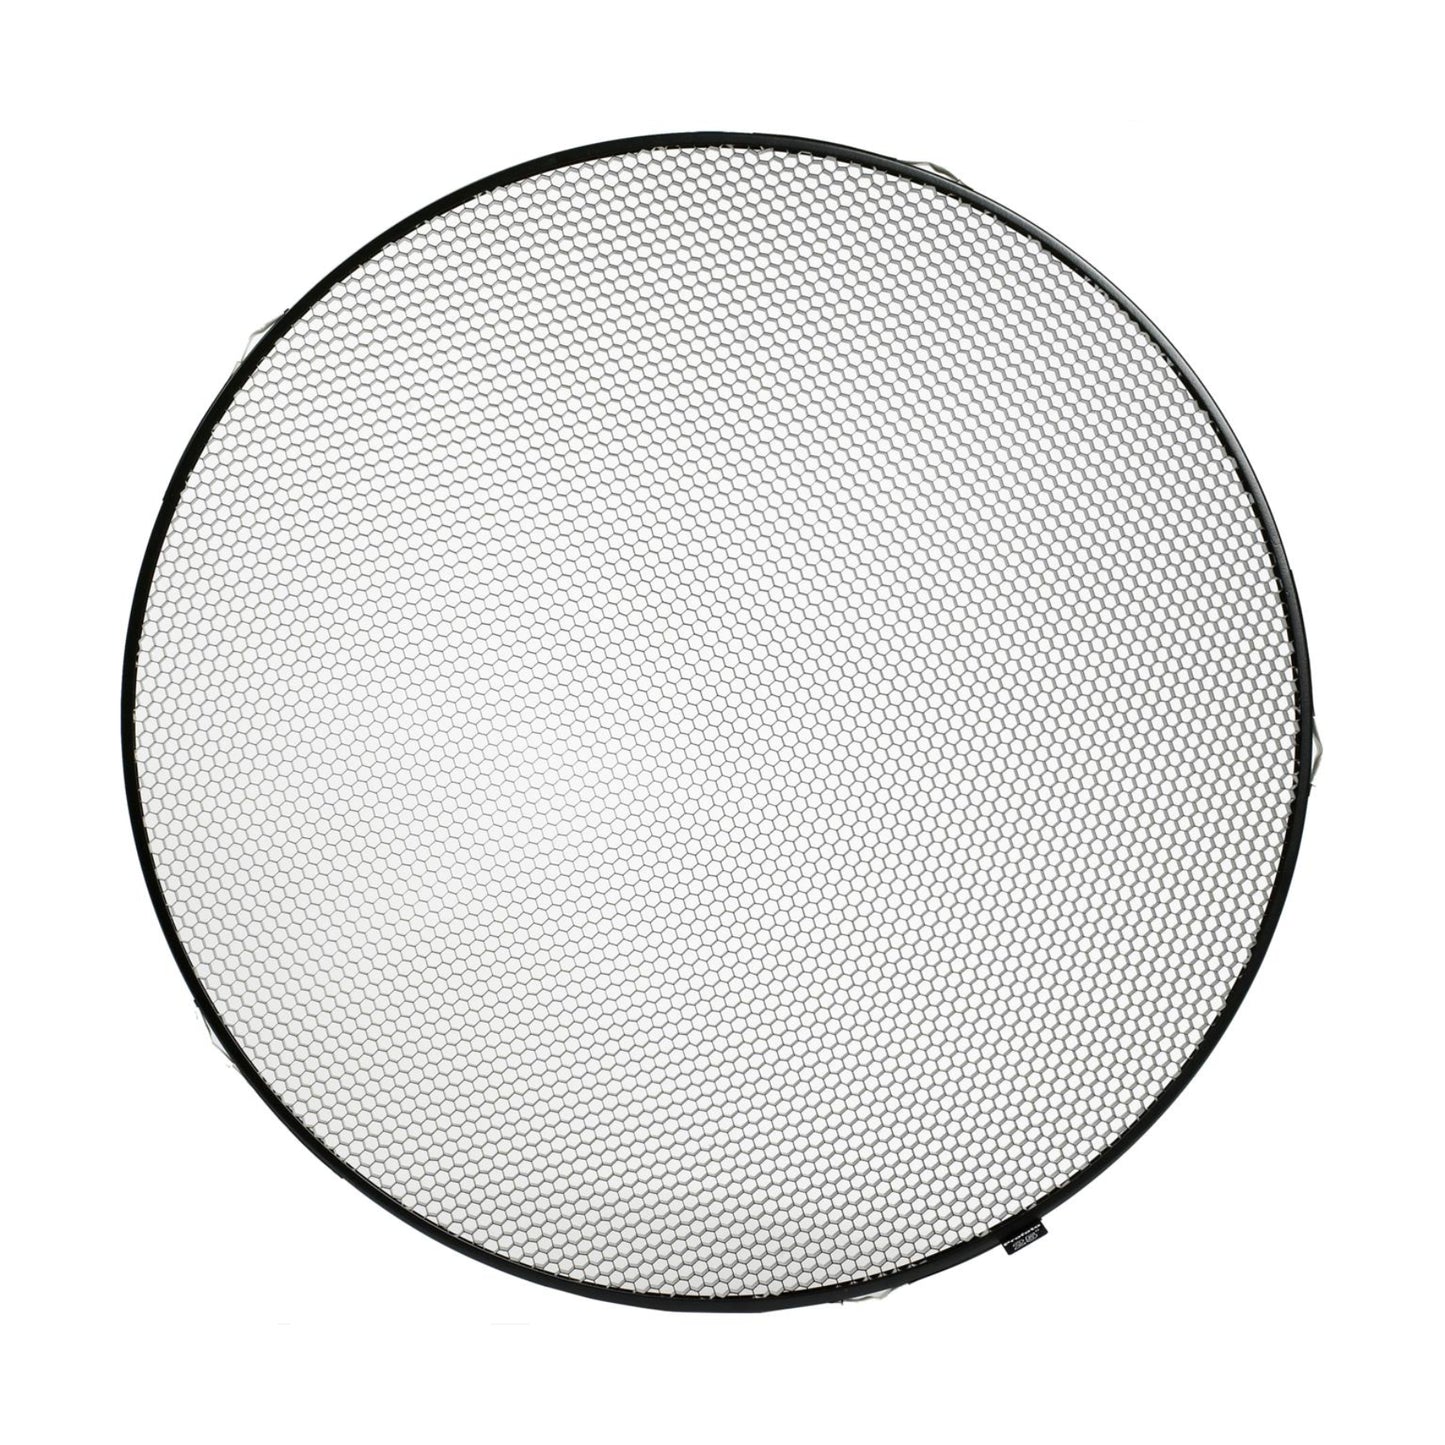 Buy Profoto Honeycomb grid for soft light reflector | Topic Store